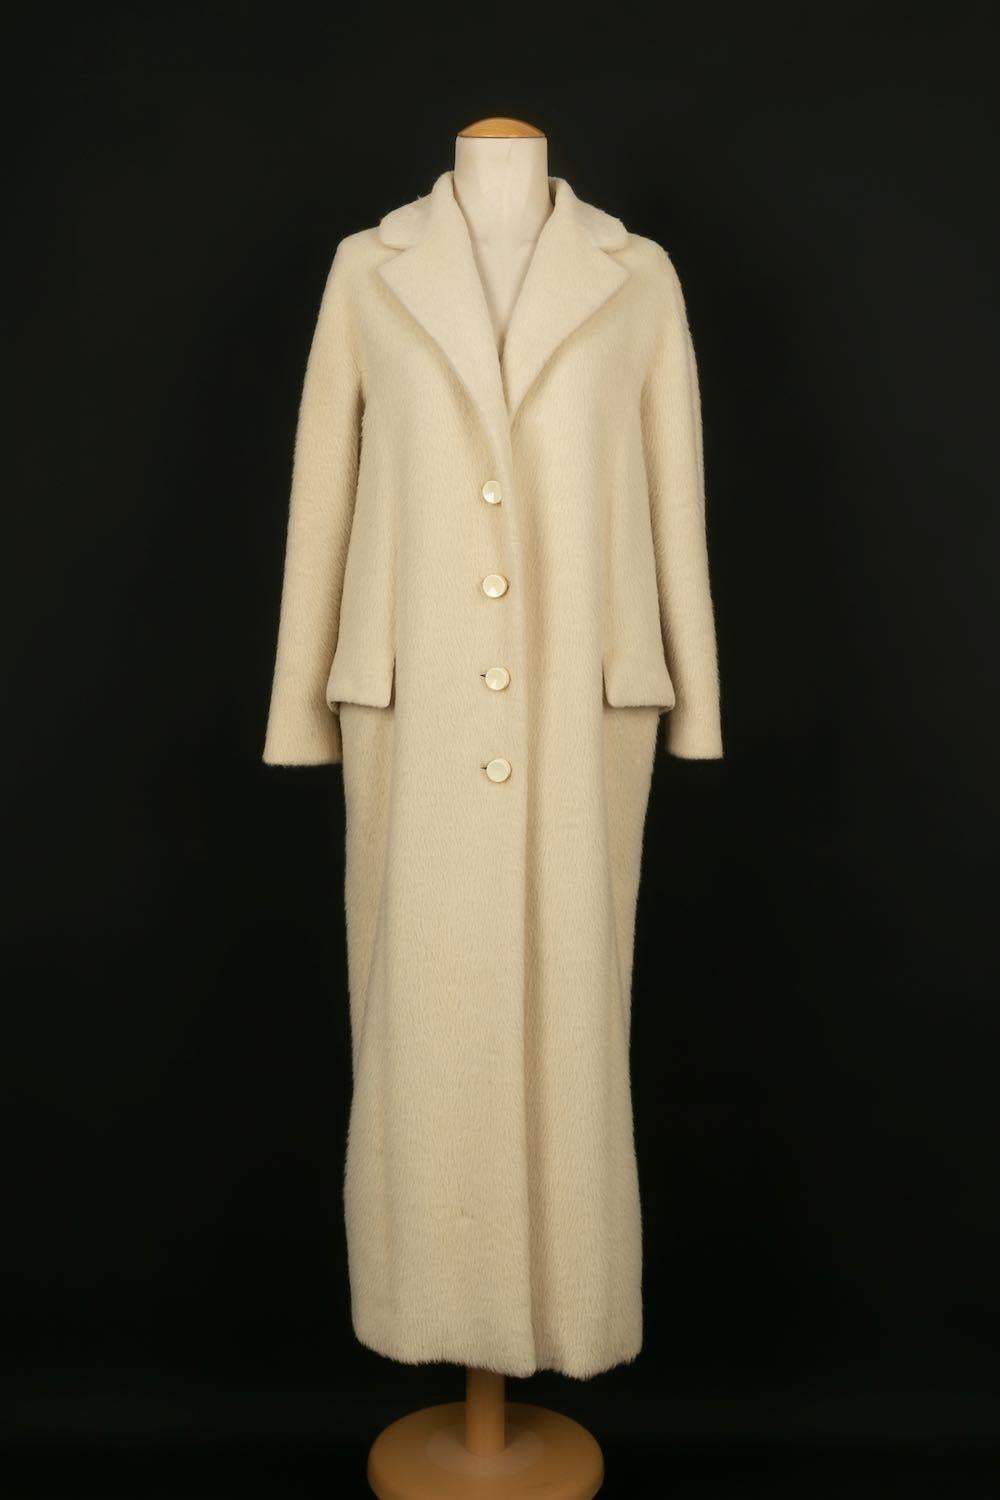 Women's Christian Dior Coat with Removable Collar in Fur For Sale